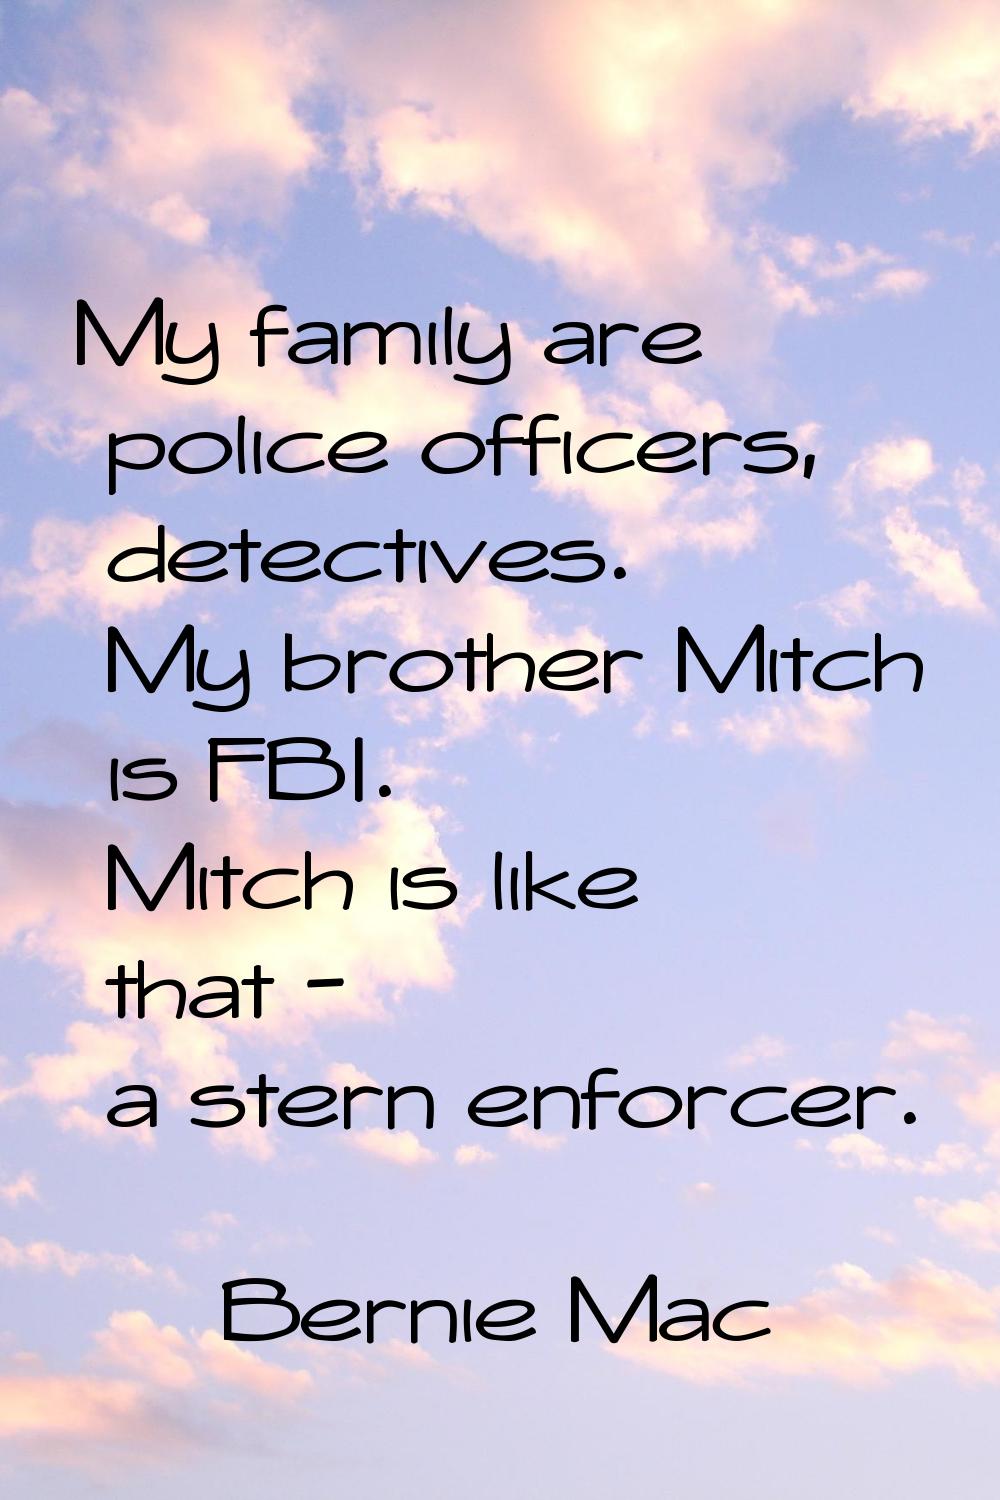 My family are police officers, detectives. My brother Mitch is FBI. Mitch is like that - a stern en